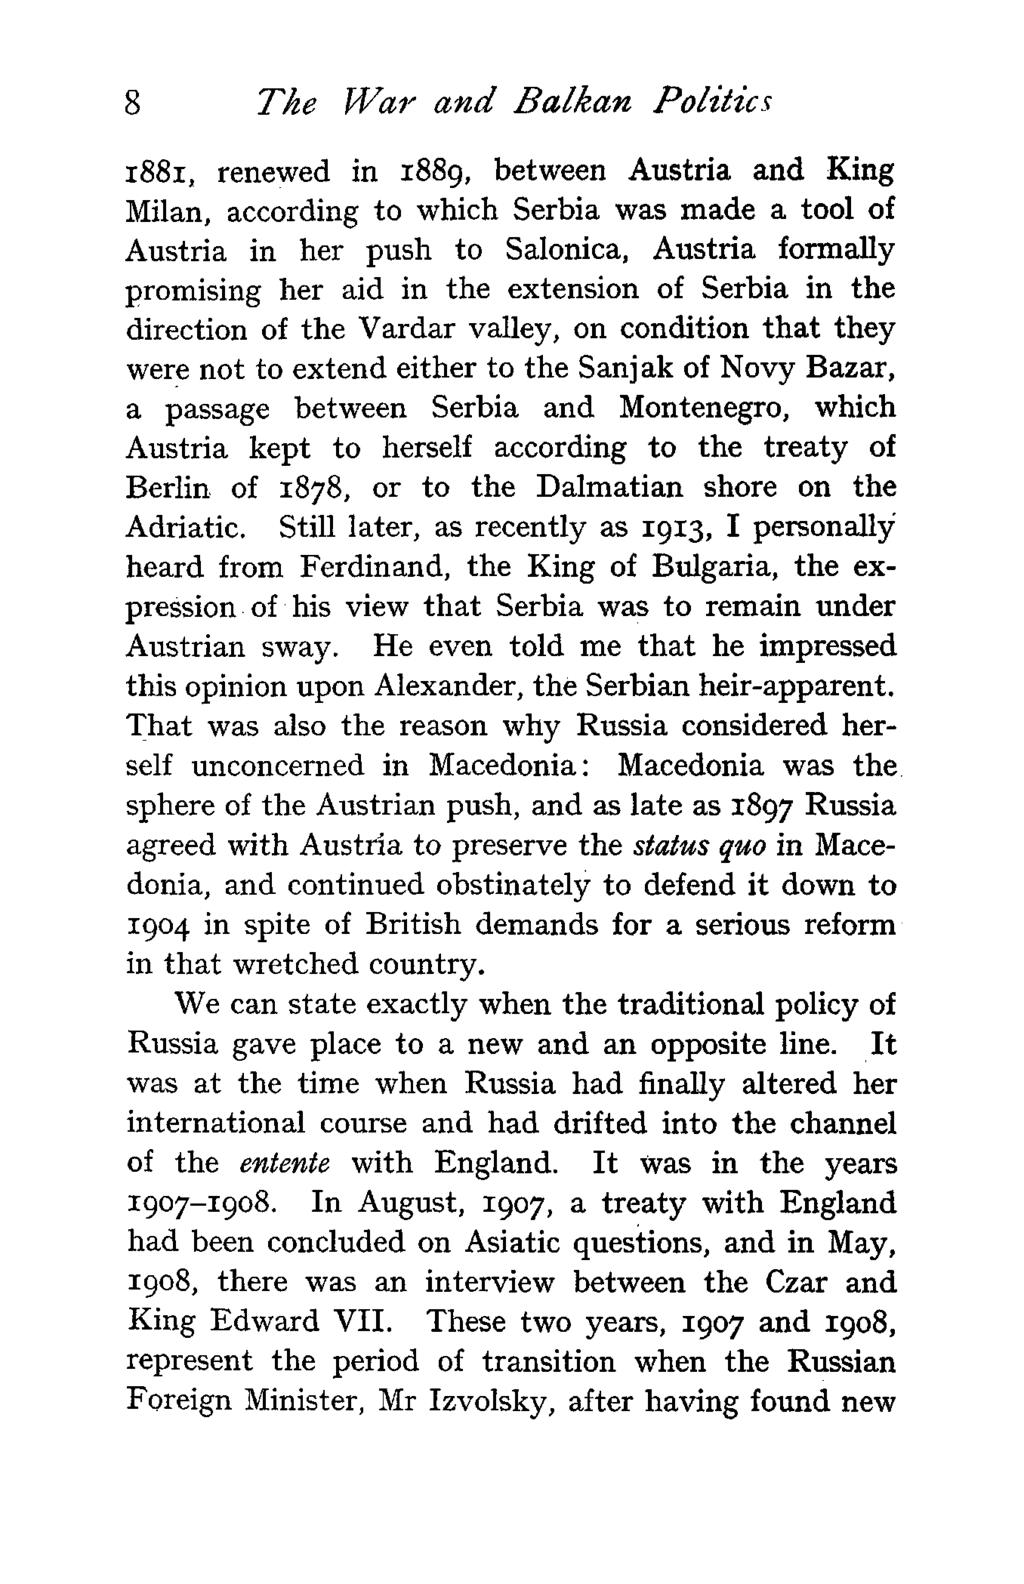 8 The War and Balkan Politics 1881, renewed in 1889, between Austria and King Milan, according to which Serbia was made a tool of Austria in her push to Salonica, Austria formally promising her aid